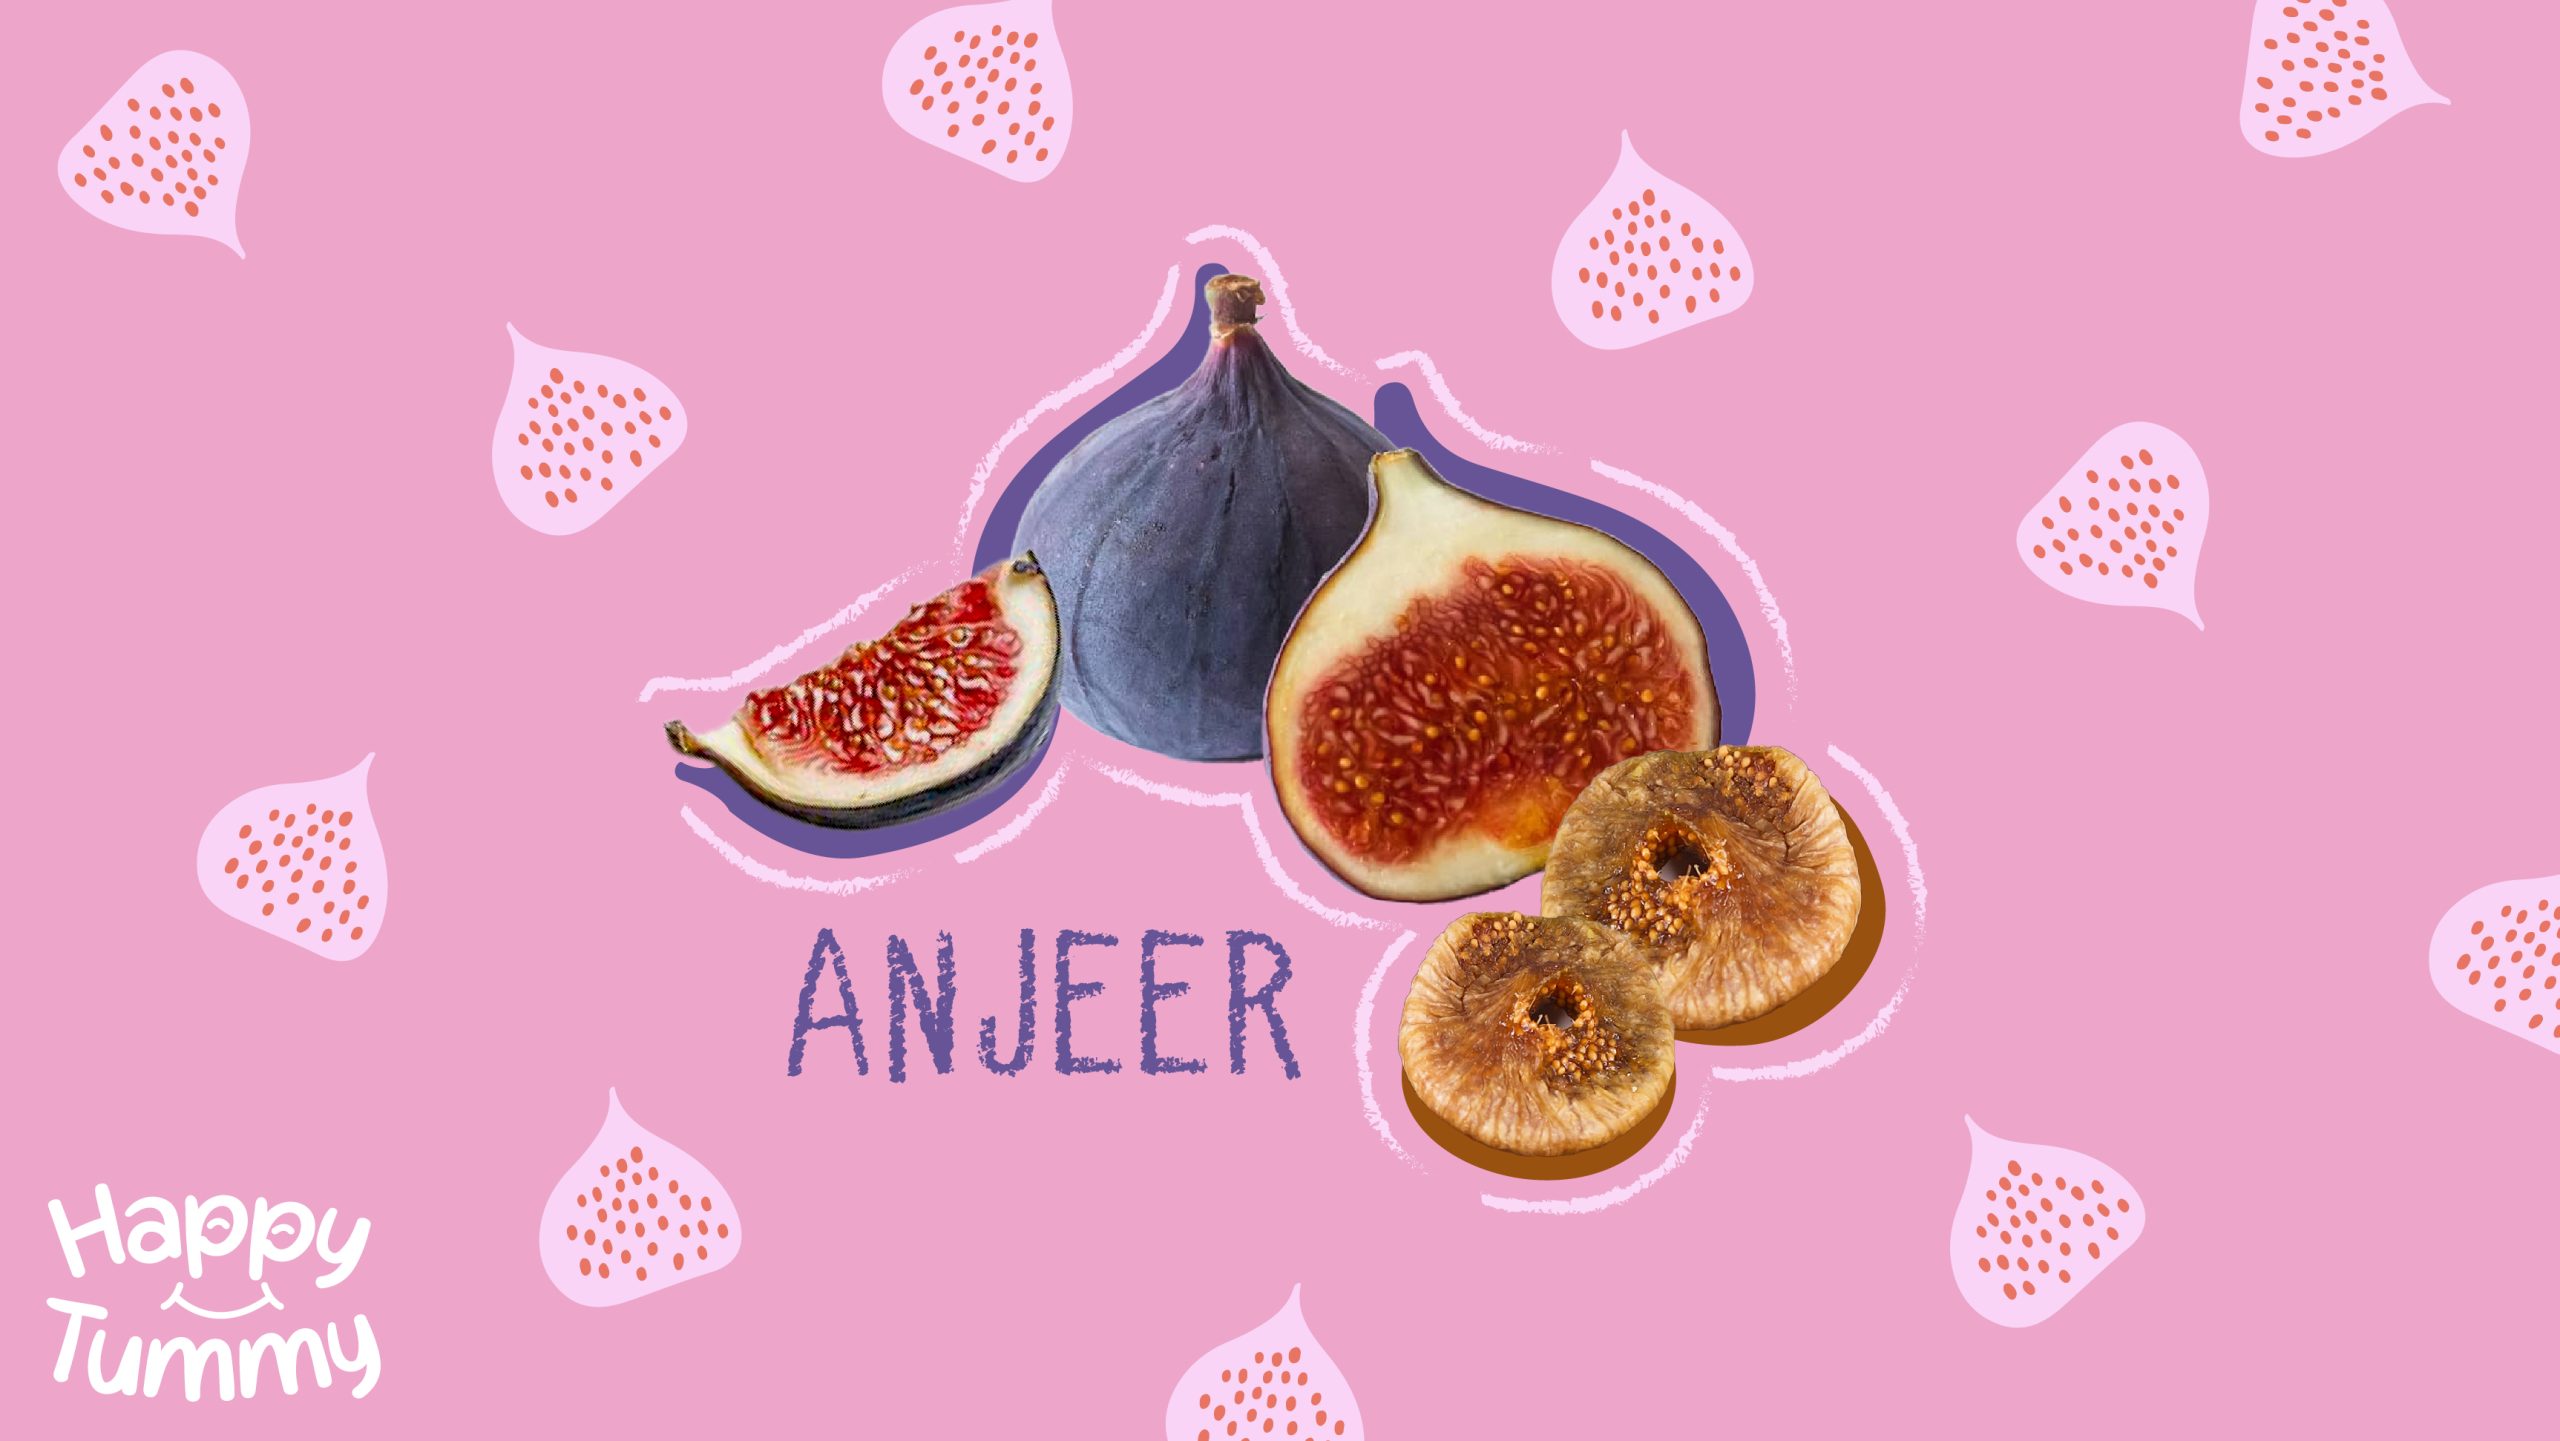 10 health benefits of Anjeer: Benefits, Uses & Side Effects